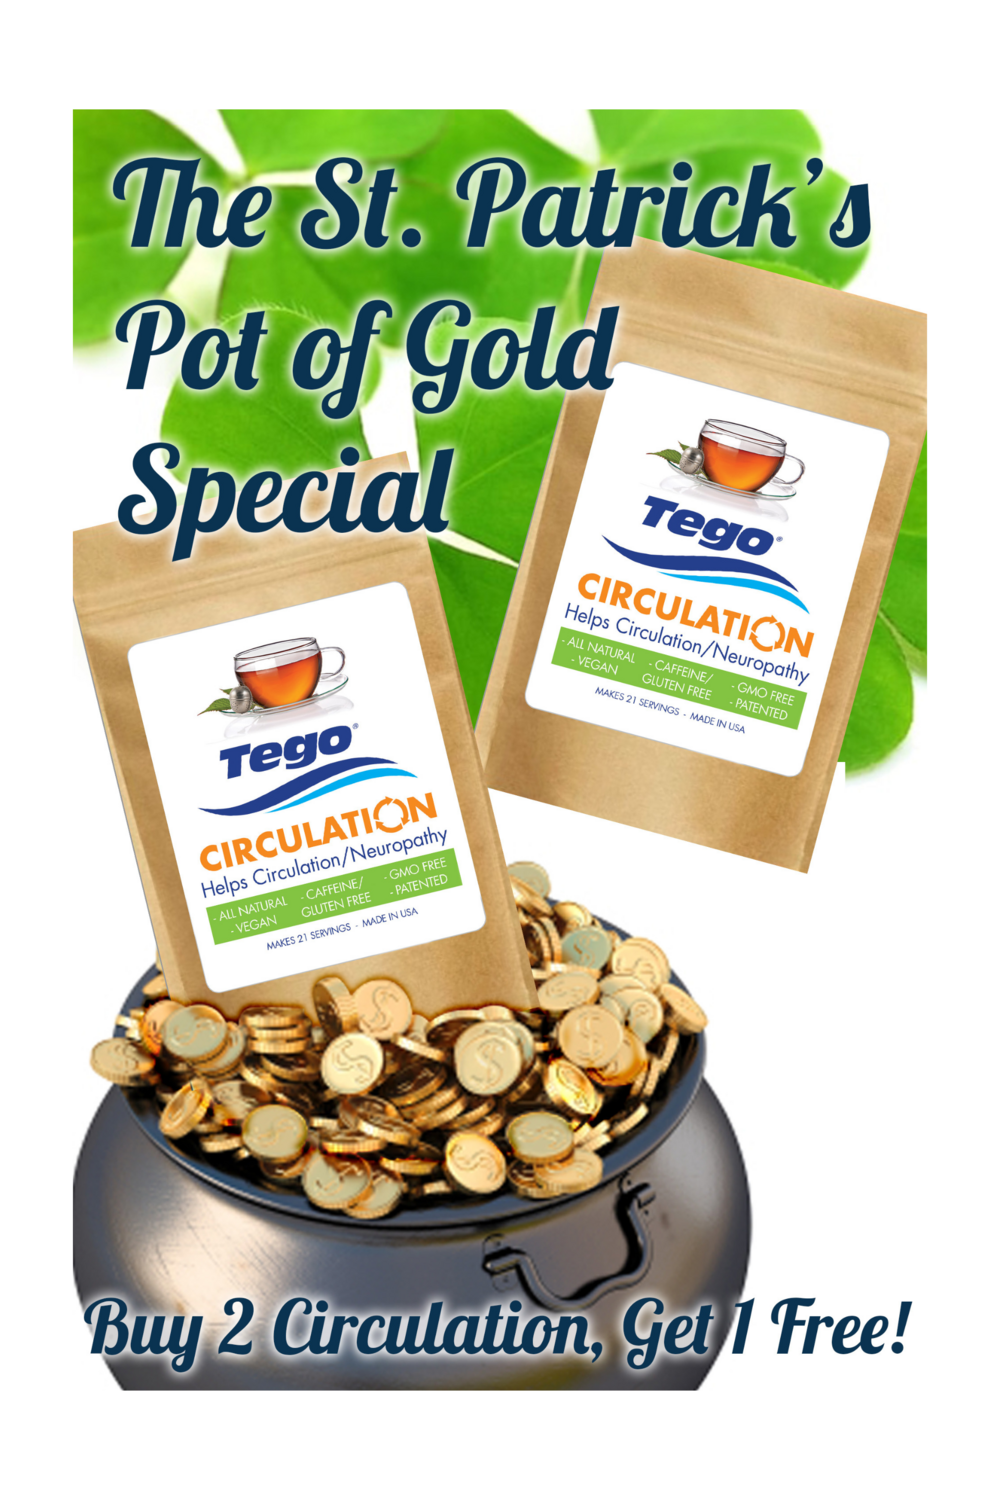 Tego March SPECIAL OFFER